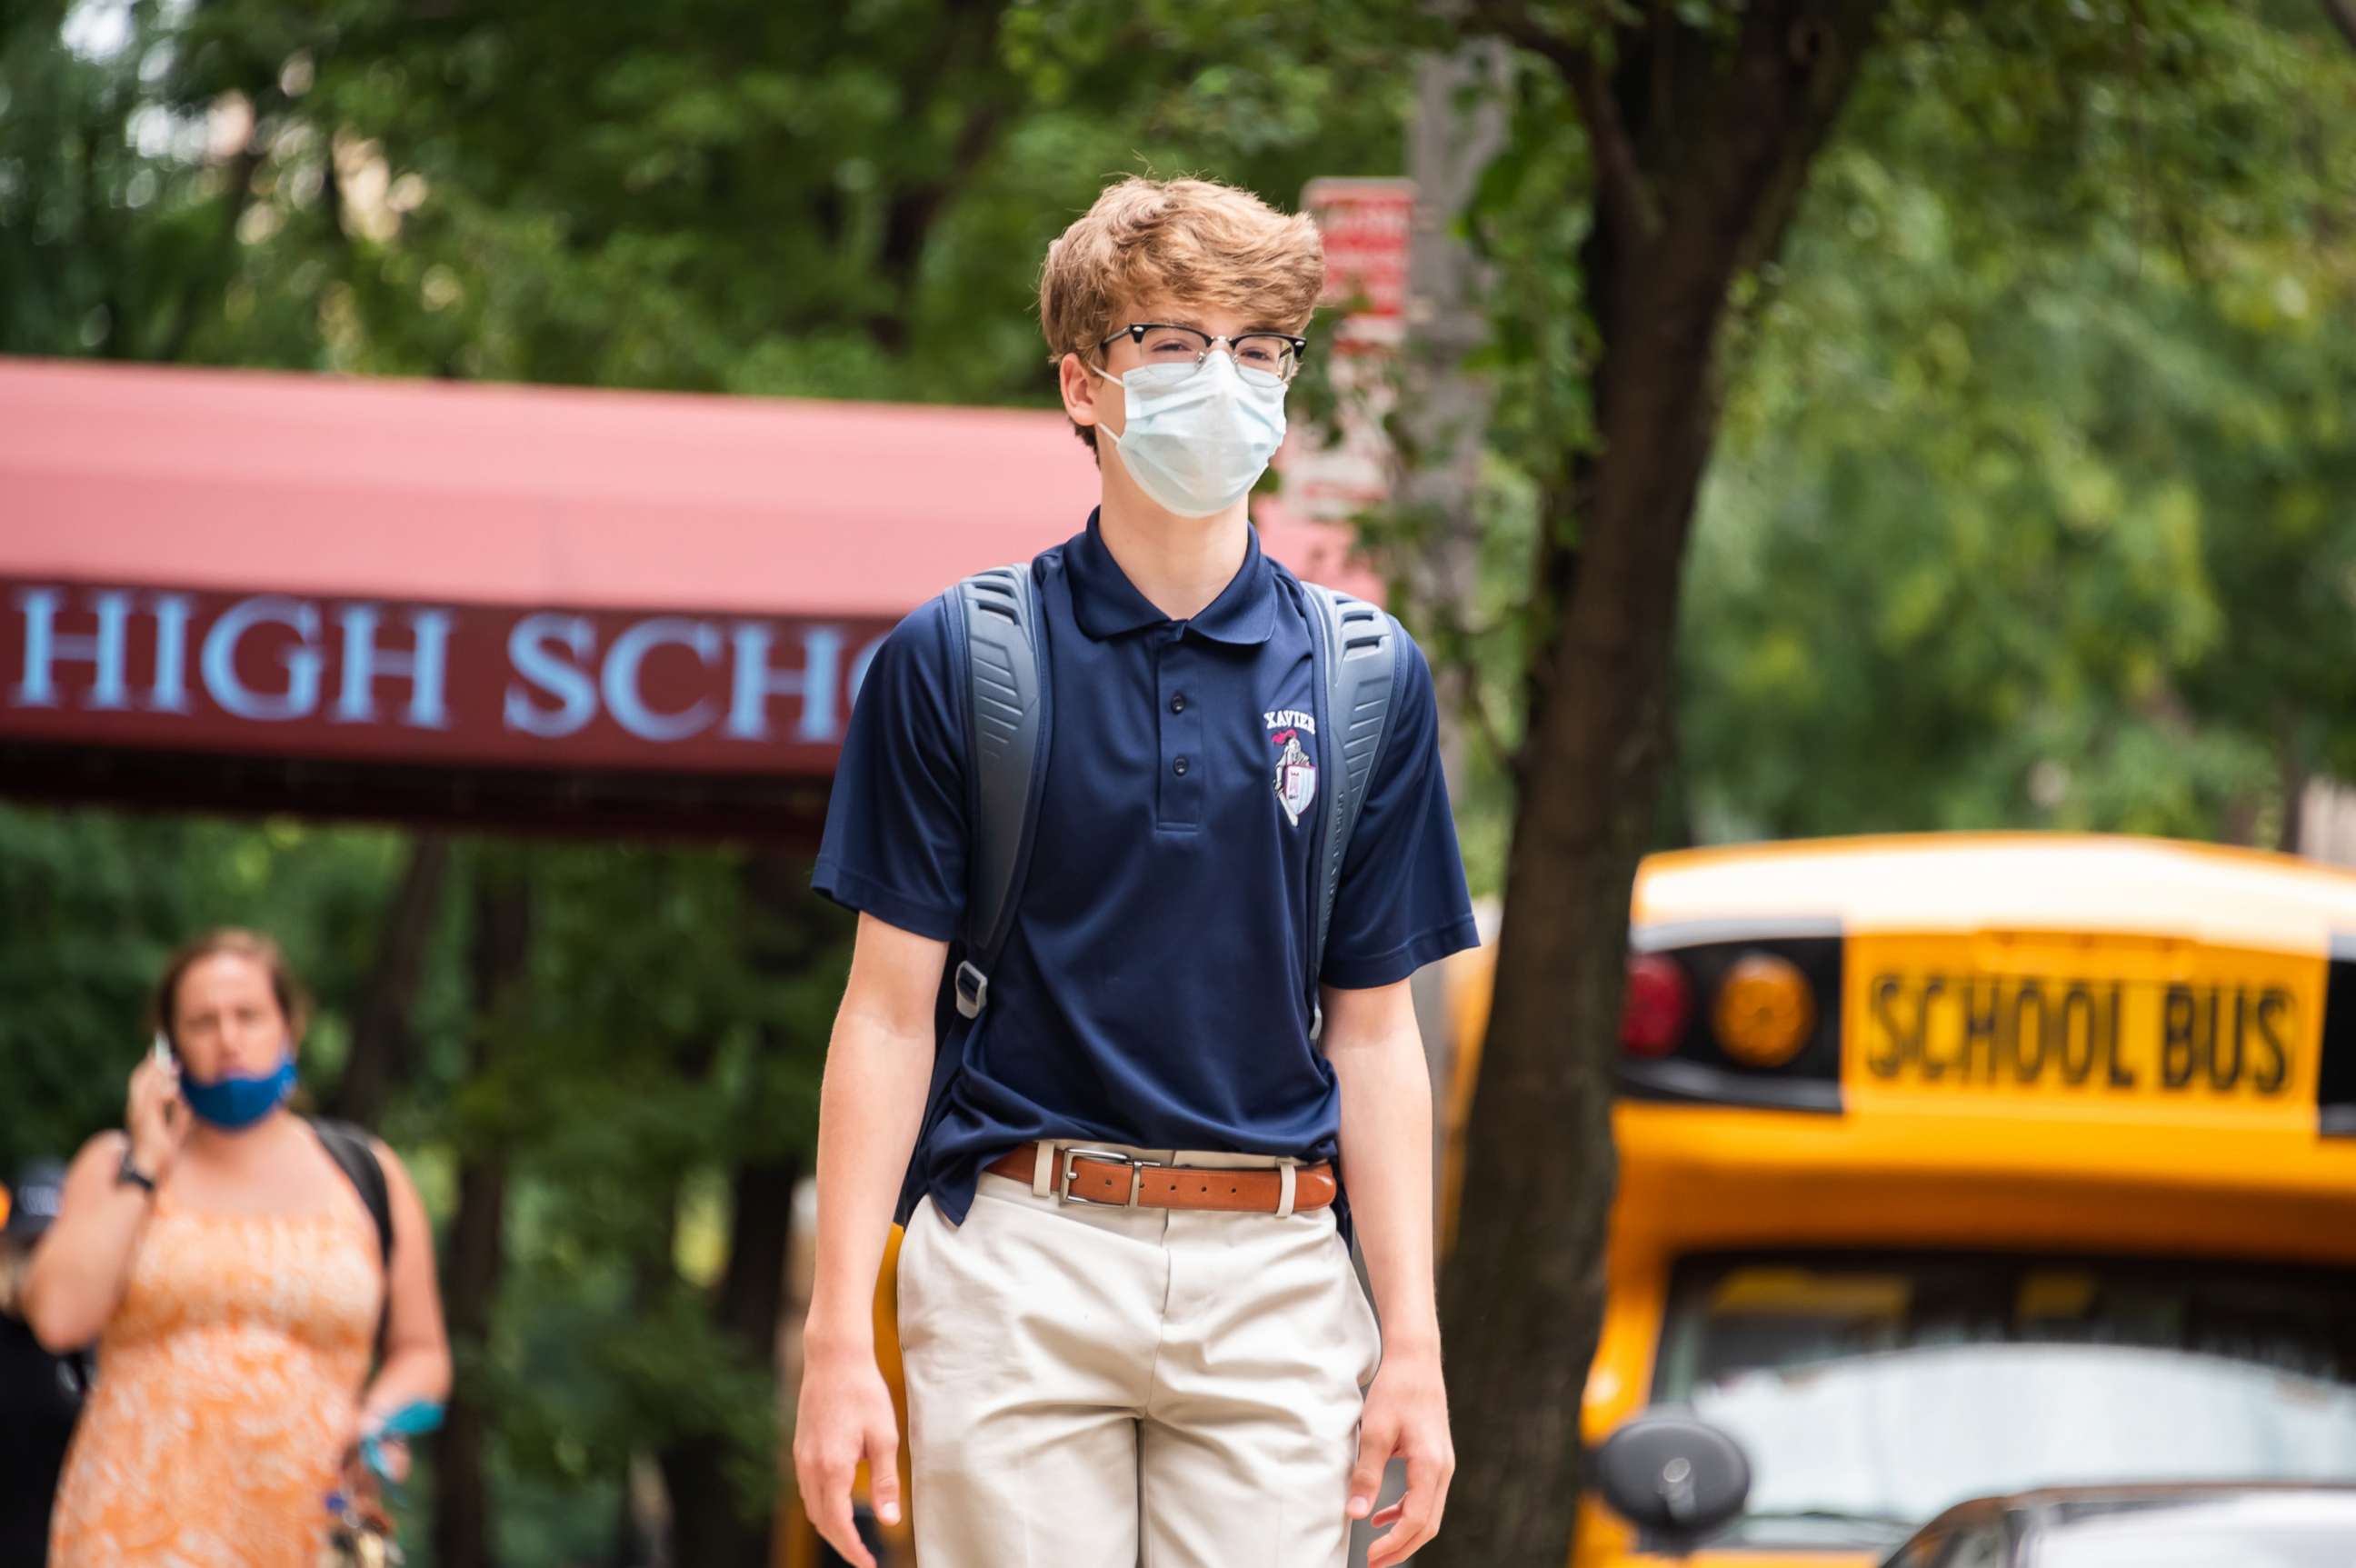 PHOTO: In this Sept. 29, 2020, file photo, a student wears a face mask outside Xavier High School as the city continues Phase 4 of re-opening following restrictions imposed to slow the spread of COVID-19 in New York.